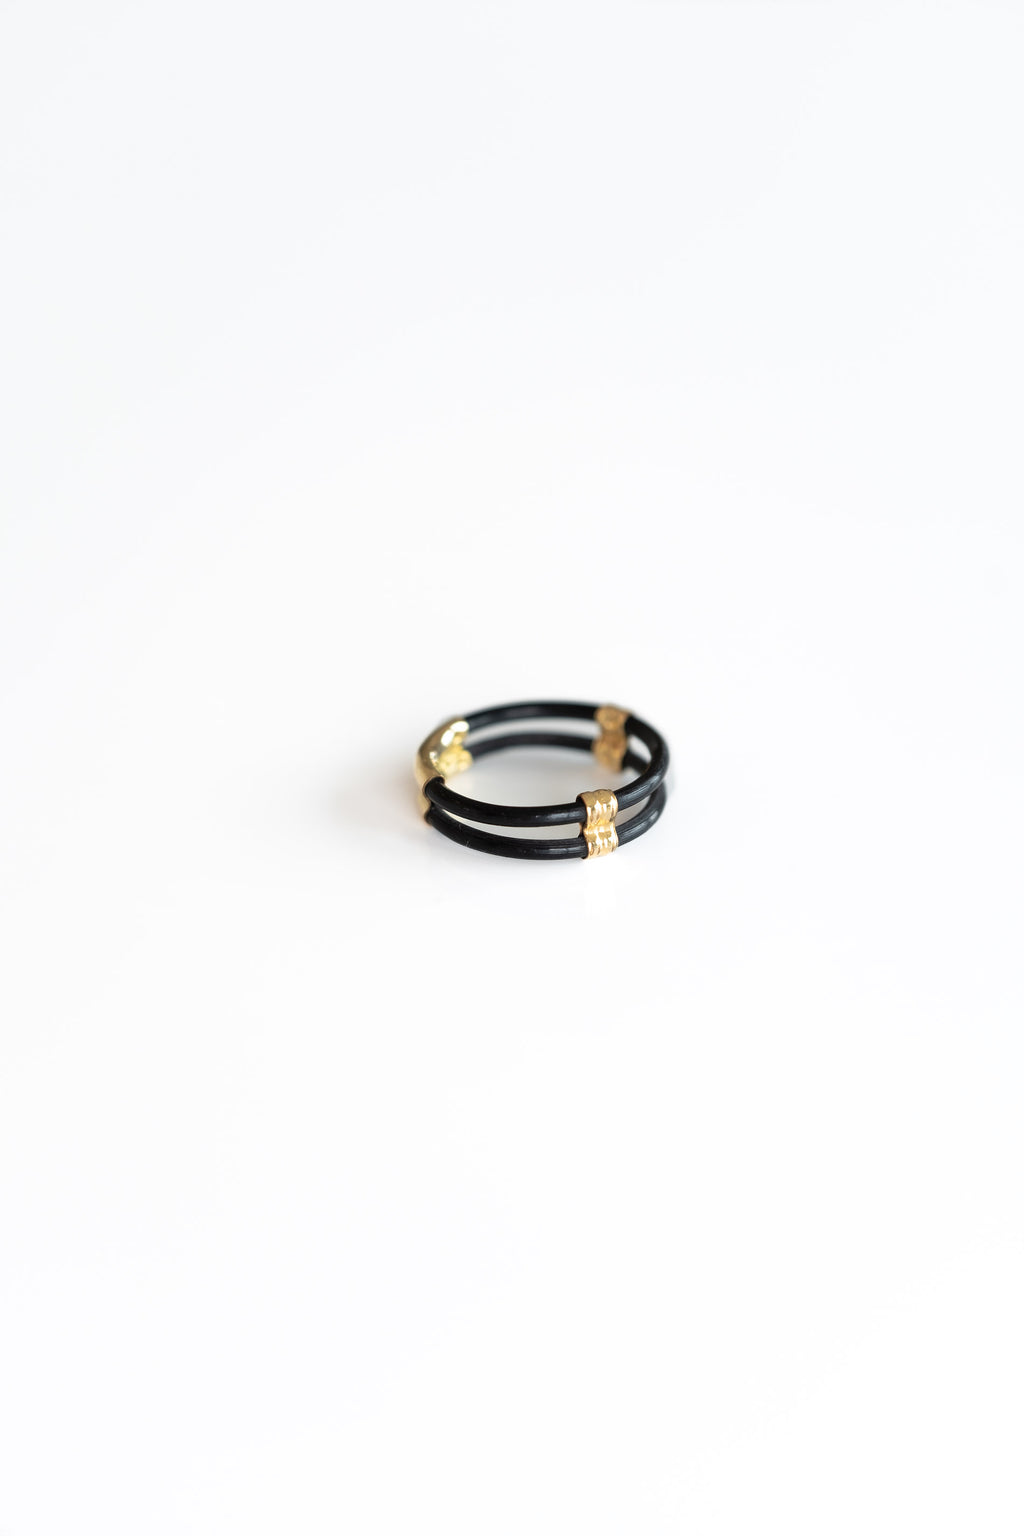 RINGS – RELIQUARY